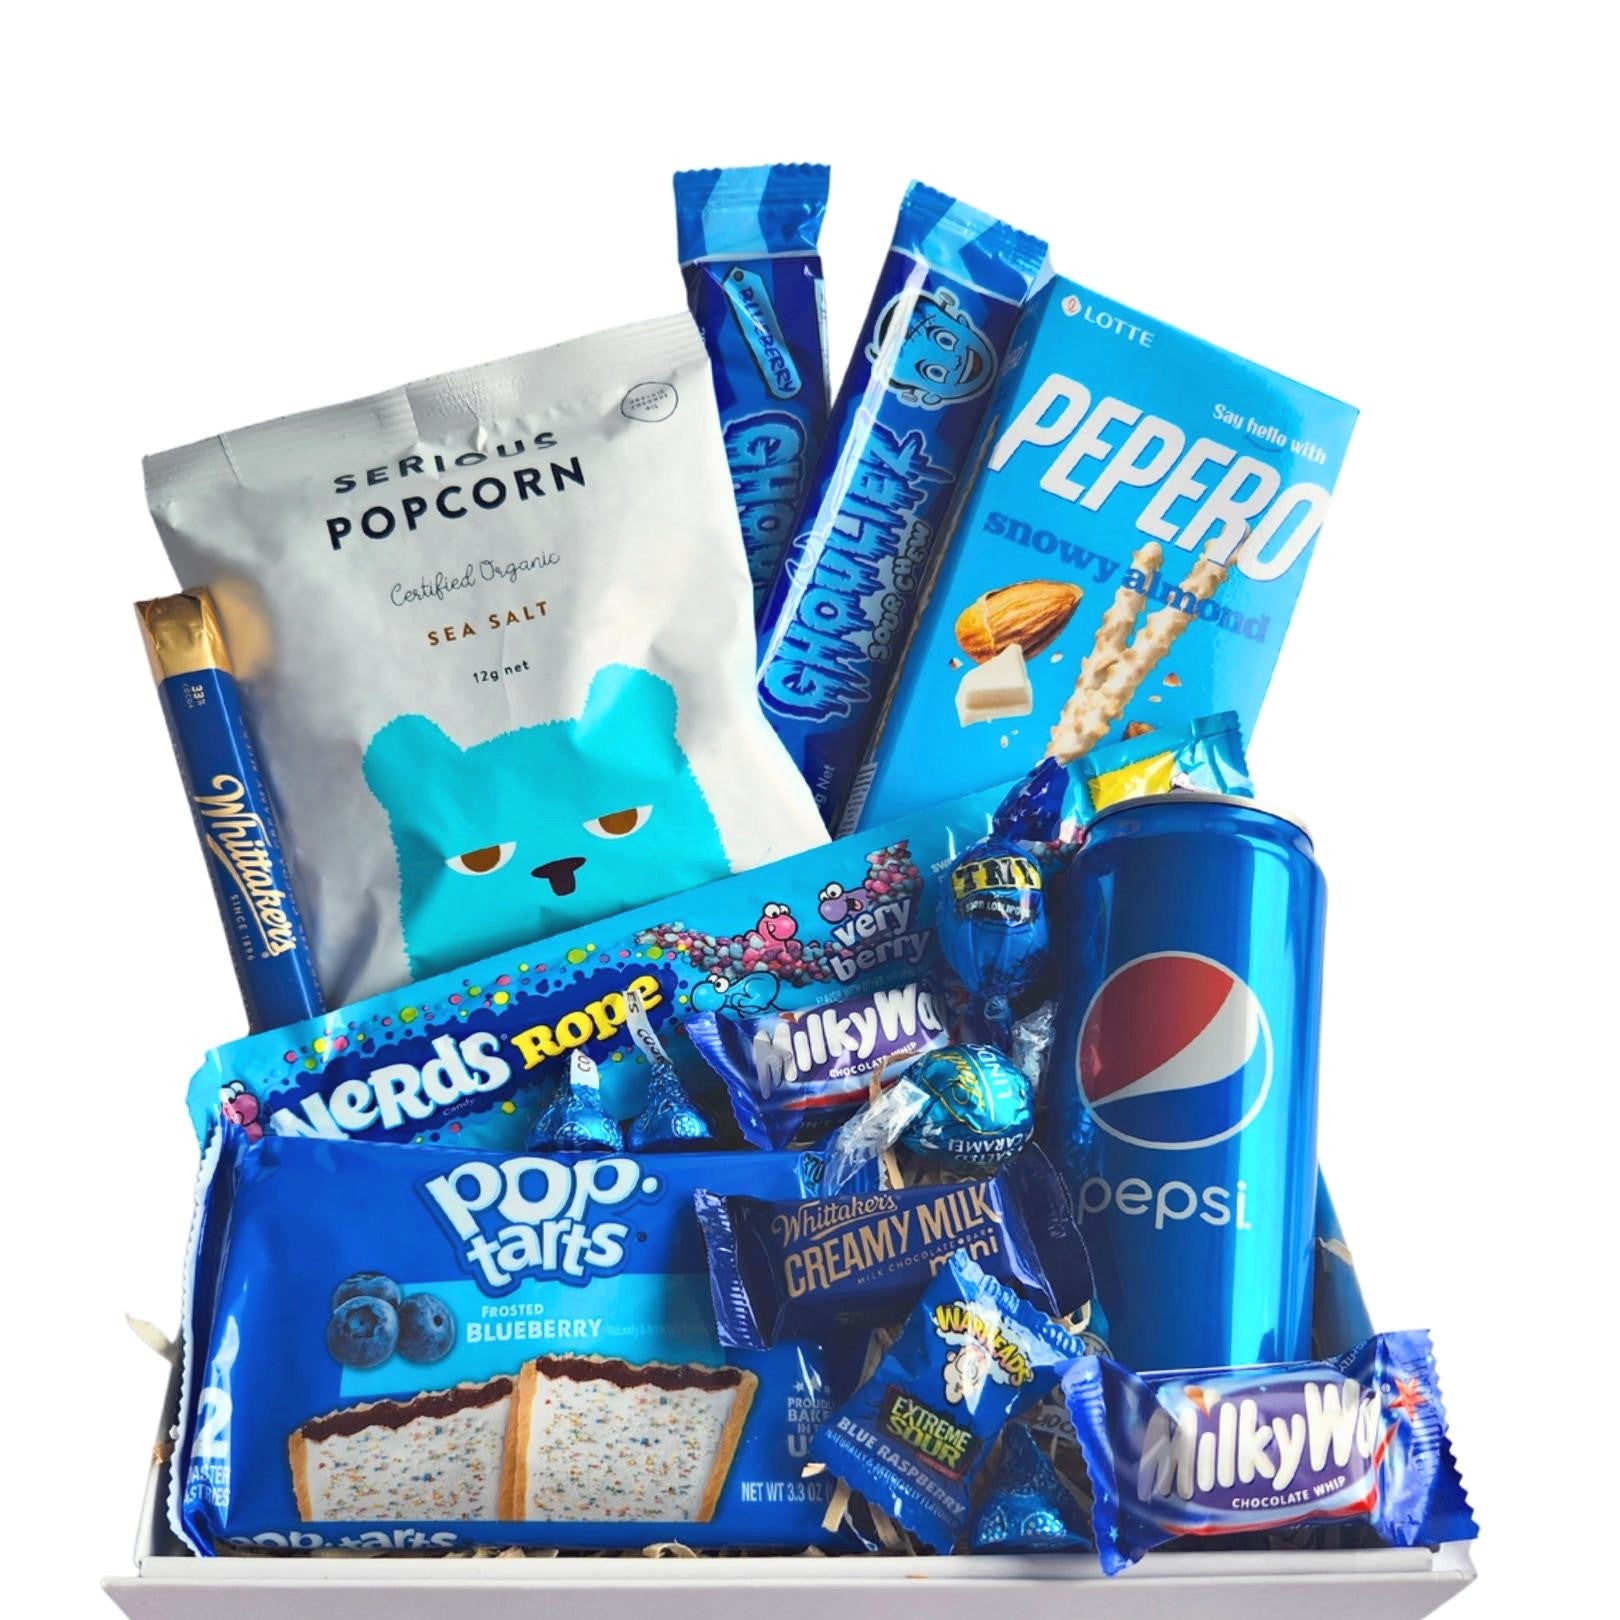 The snack box is filled with tasty treats! It will help with the blues and cheer up anyone’s day! A unique gift, or just for you…  What’s in the Box?  Nerds ropes berry x1 Whittaker’s sante bar x1 Poptart assorted flavours x1 Pepsi can x1 Mini milky way x2 Pepero x1 Whittaker's mini slab x1 Warhead x1 Hershey kisses x3 Zombie chews blueberry x2 Lindt truffle ball x1 TNT lollipop x1 Serious Popcorn sea salt 12g x1